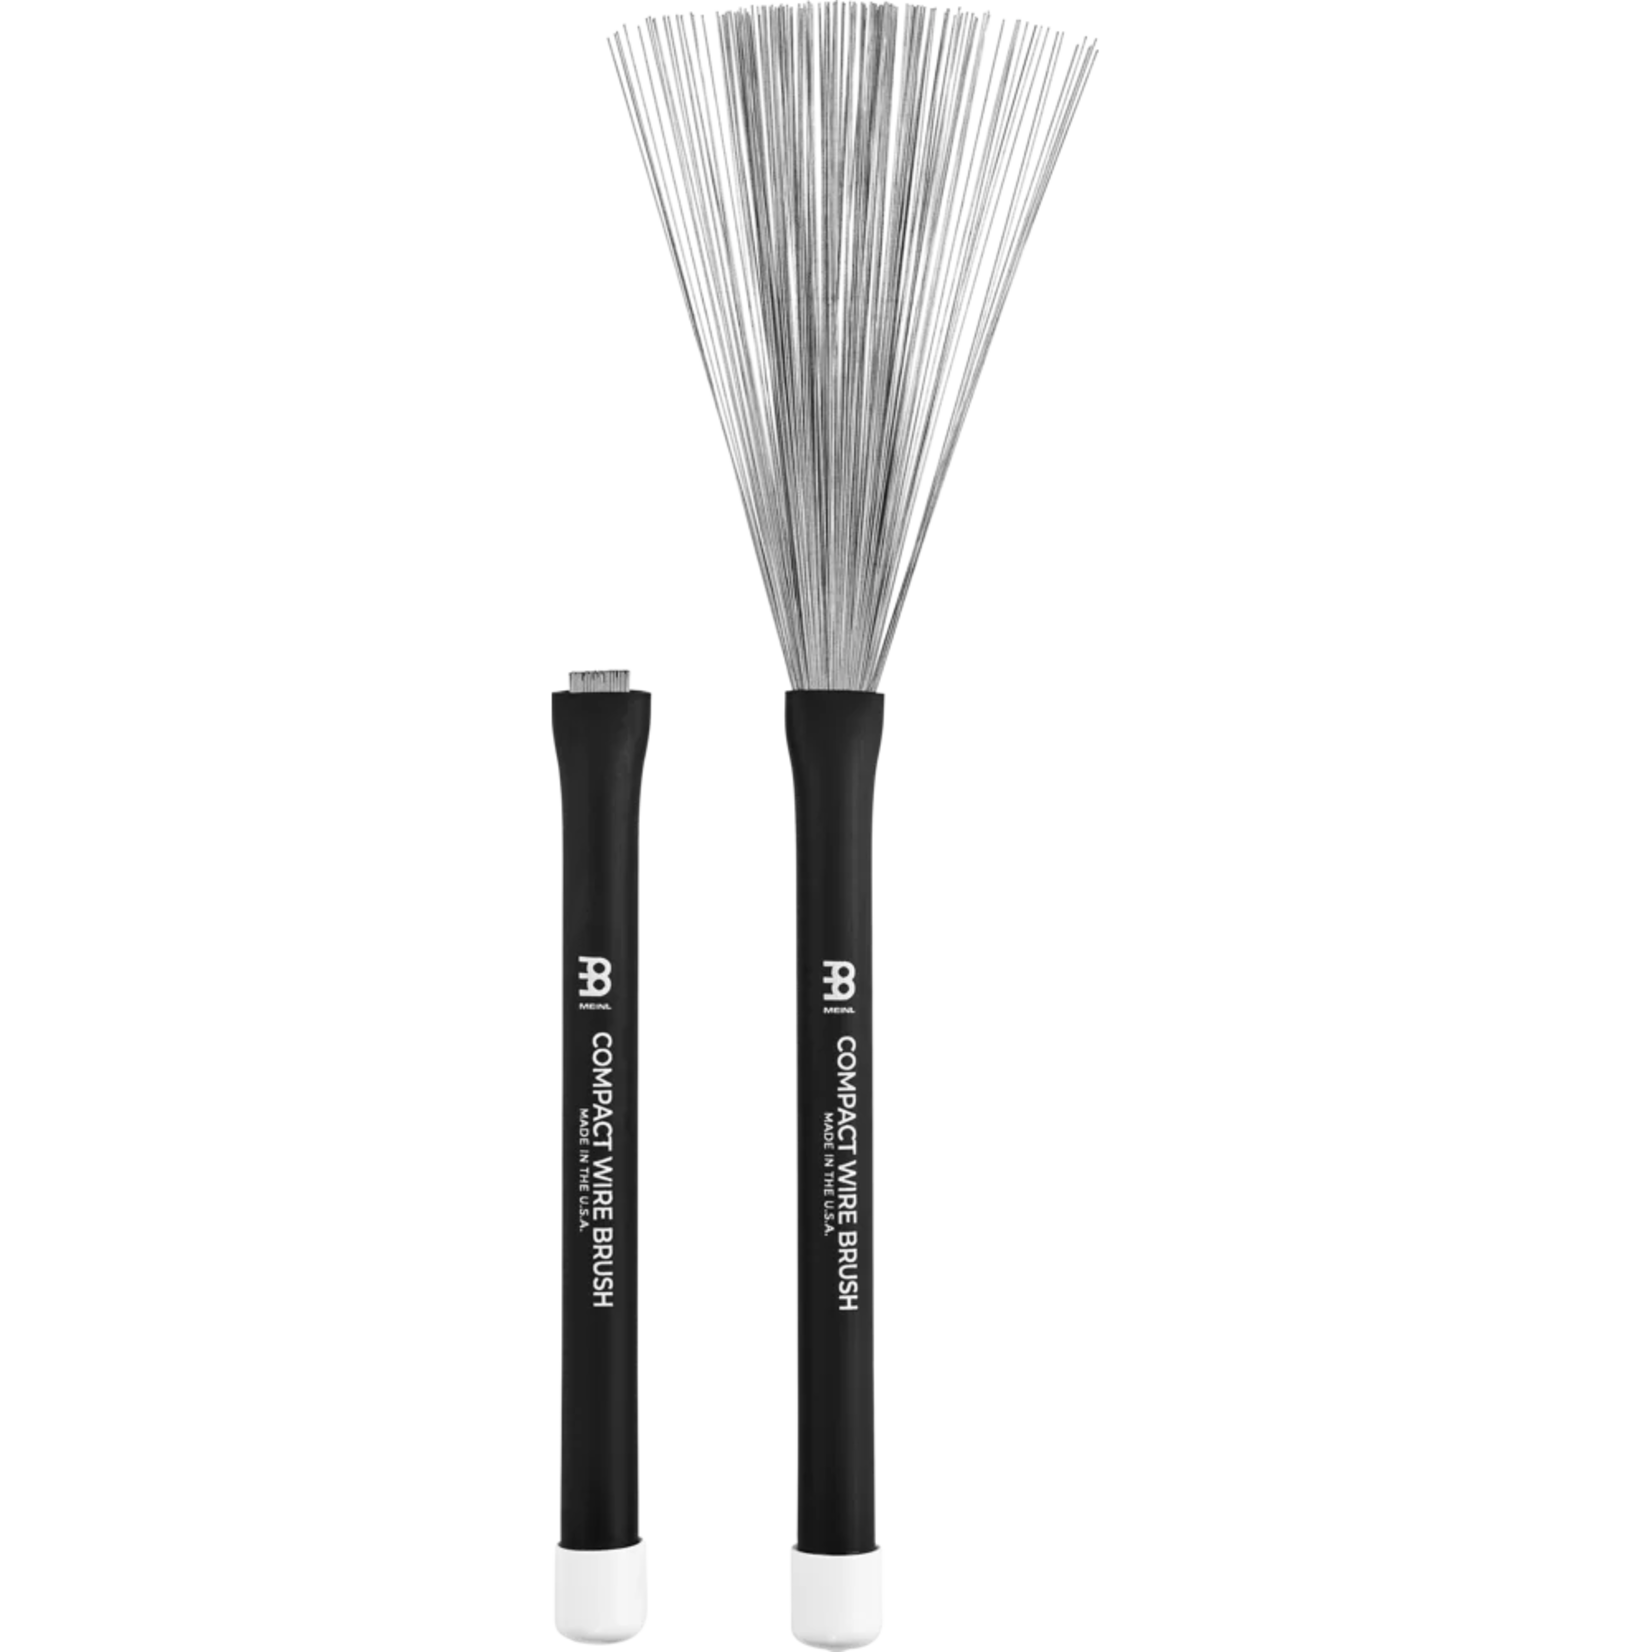 Meinl Meinl Compact Wire Brushes SB301